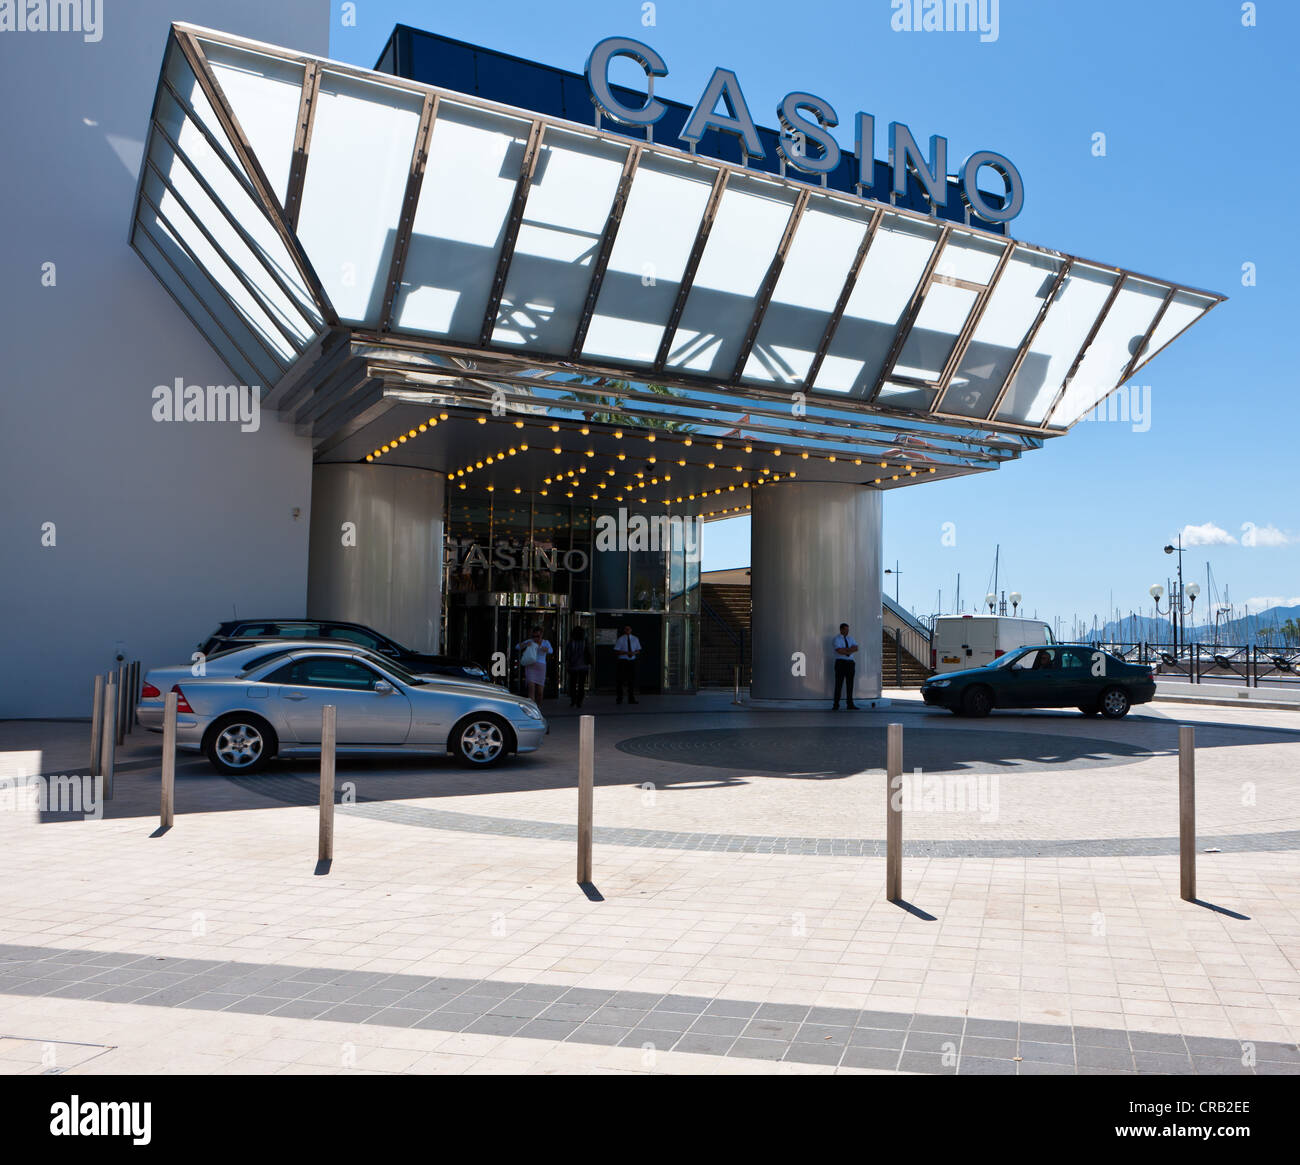 Casino on the Croisette, Cannes, Cote d'Azur, Southern France, France, Europe, PublicGround Stock Photo